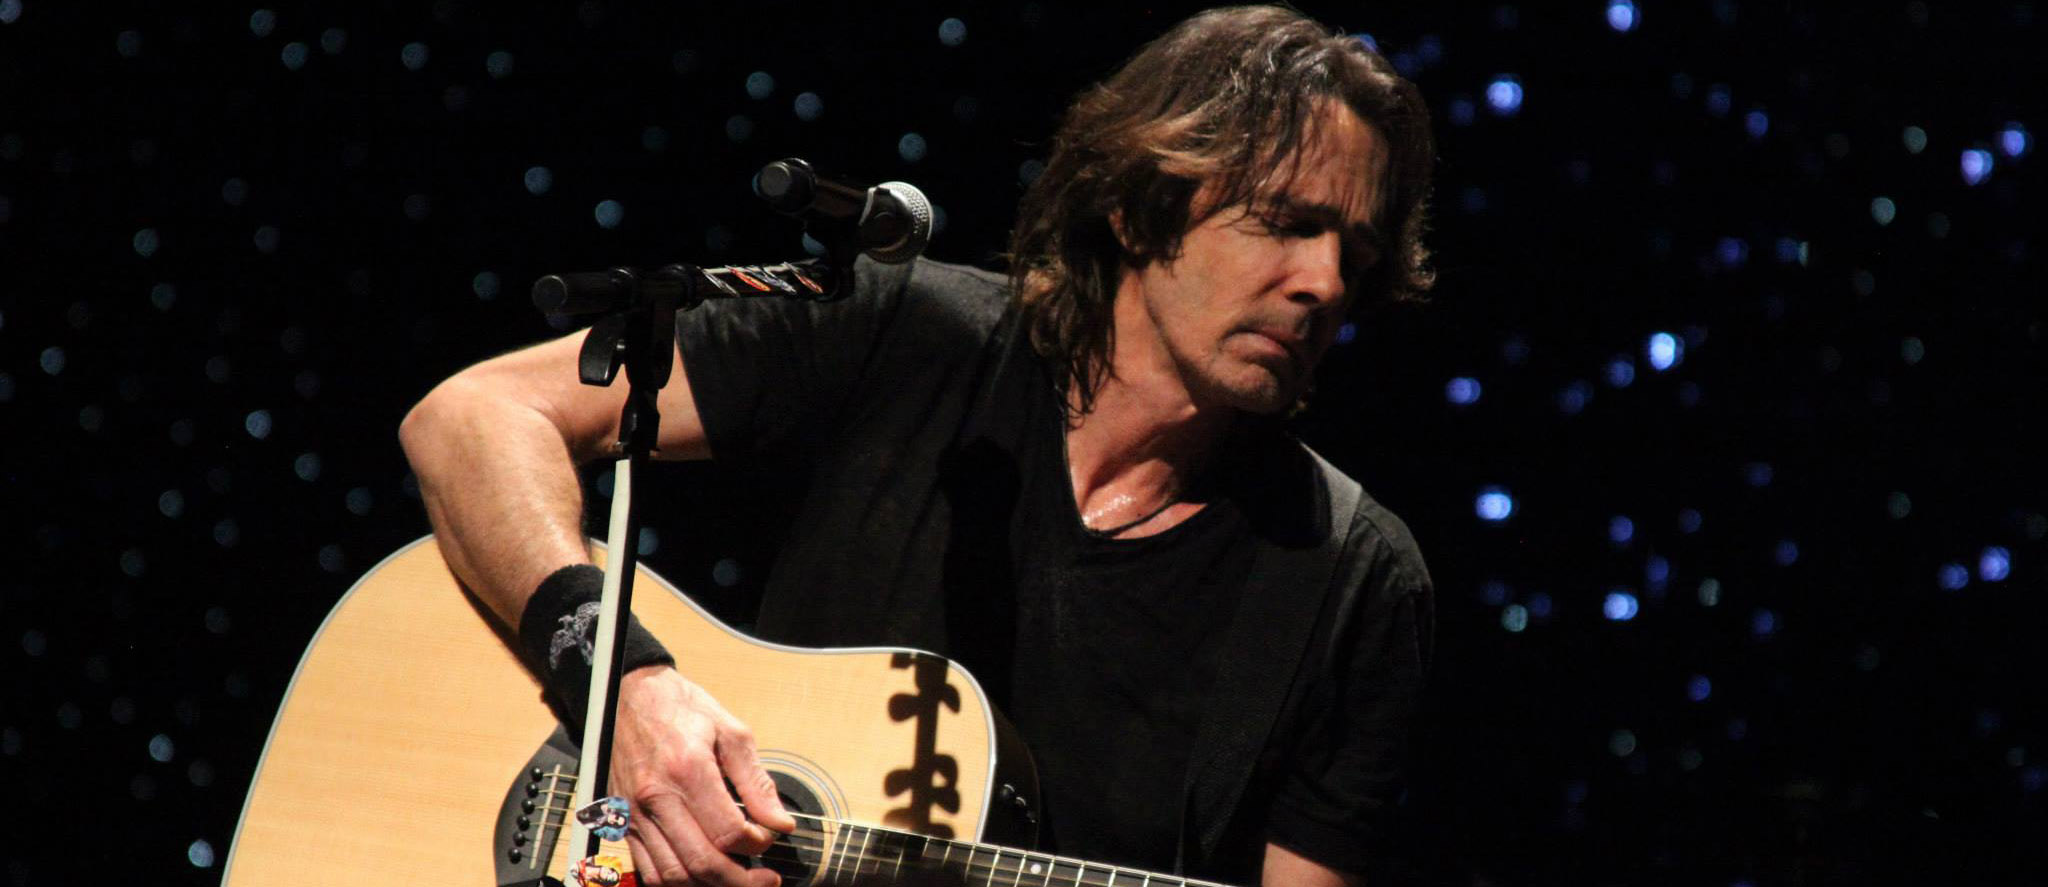 Rick Springfield on stage with acoustic guitar